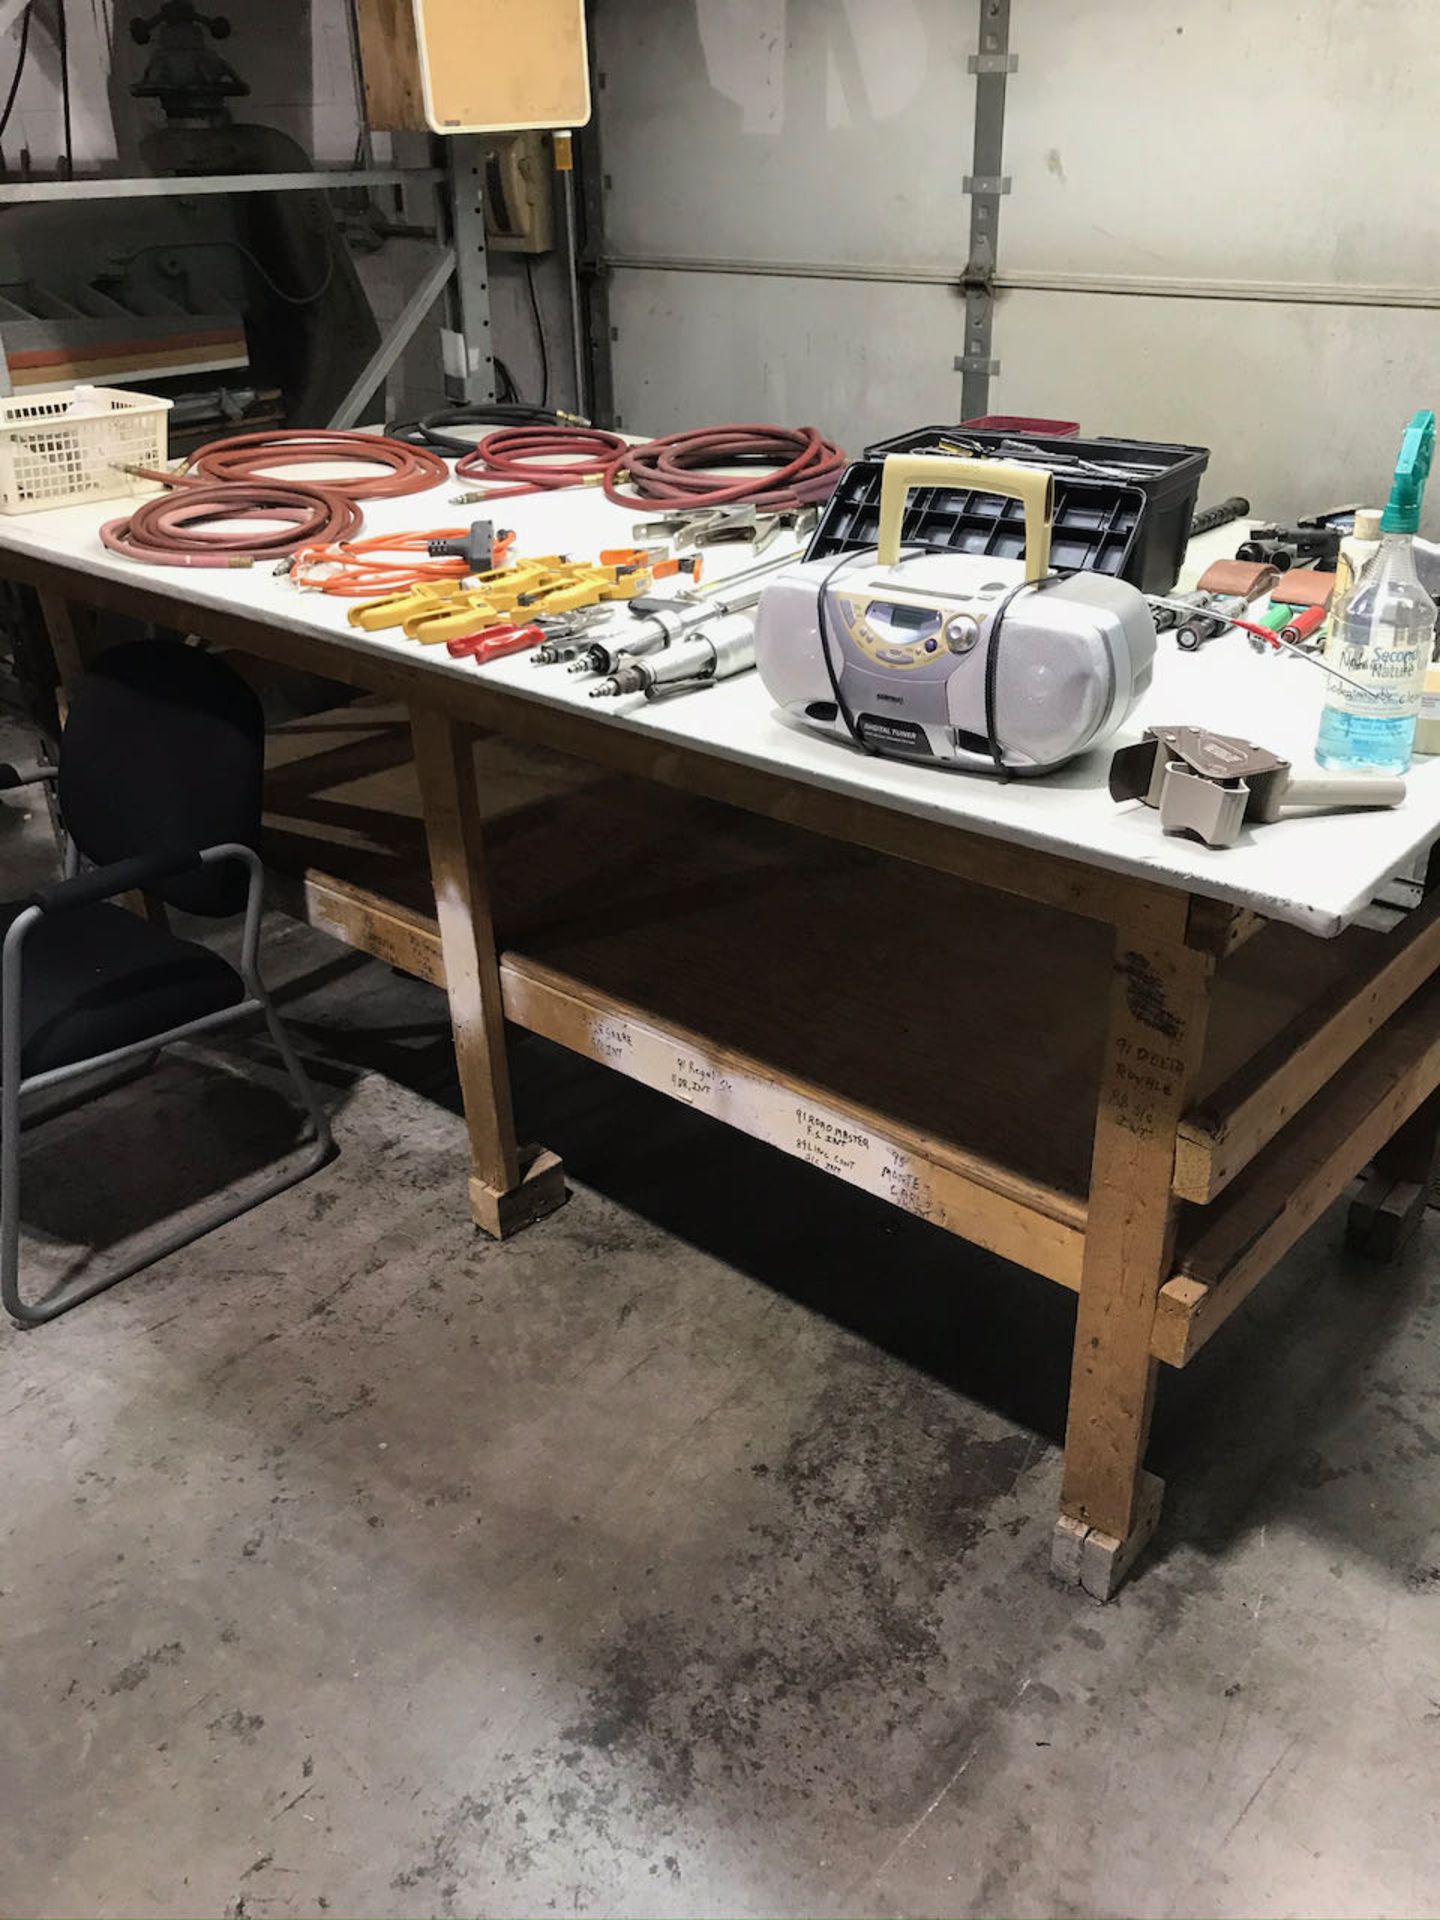 Work table with hoses, tools and clamps